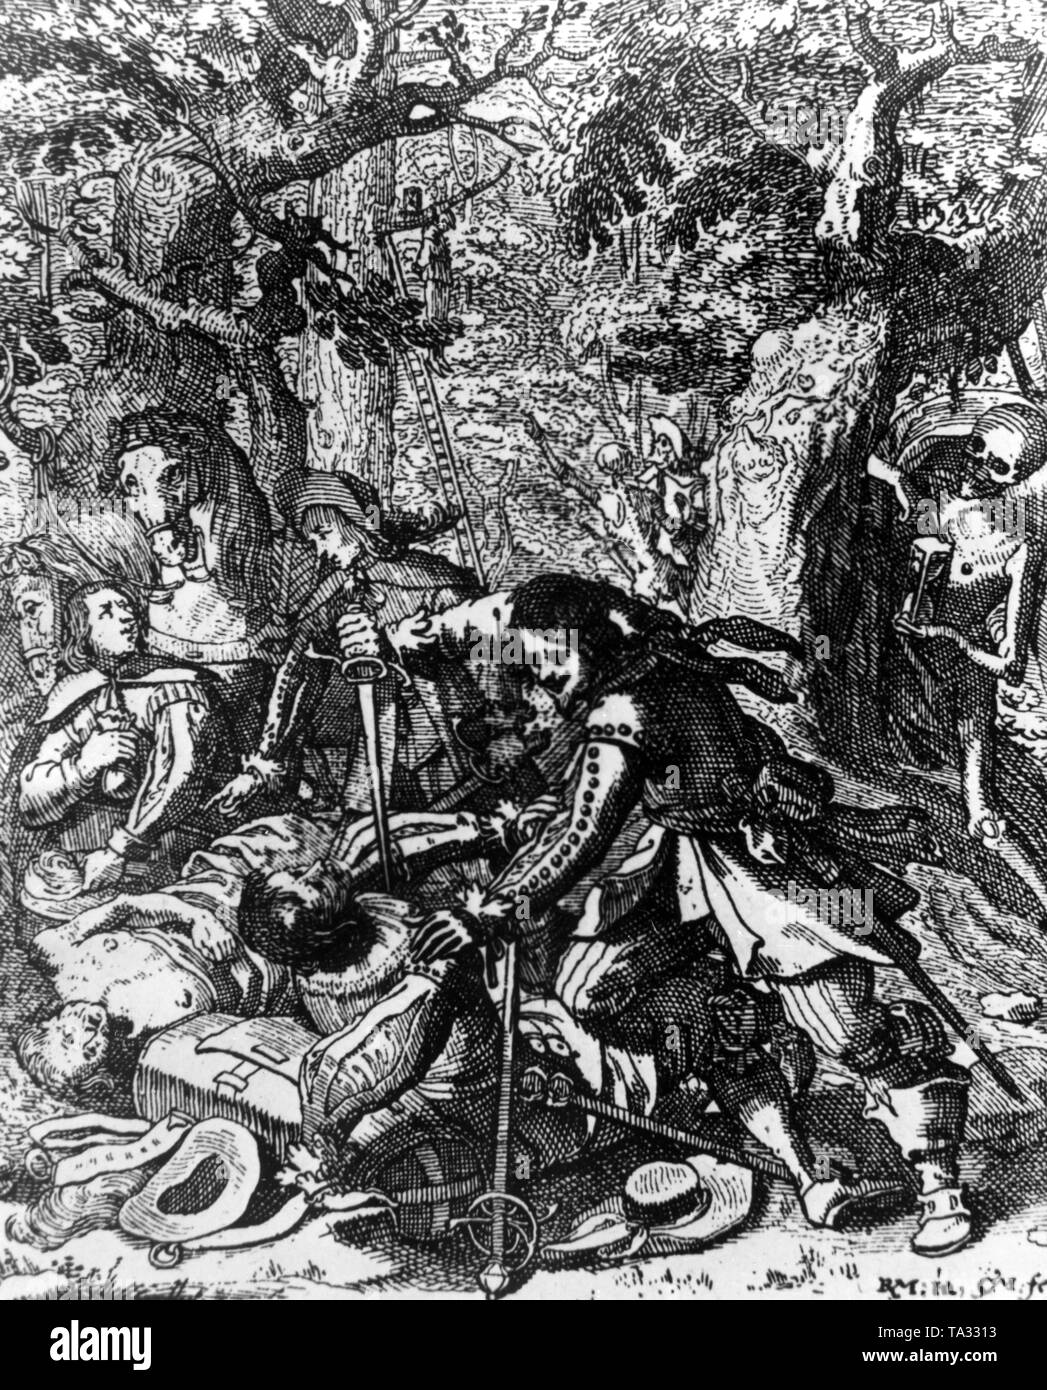 The draftsman illustrated dramatically the conditions on the streets of Germany during the Thirty Years' War, when marauding soldiers and highwaymen ransacked every traveler. The death behind the tree and the gallows as a final destination should serve as a warning. Stock Photo